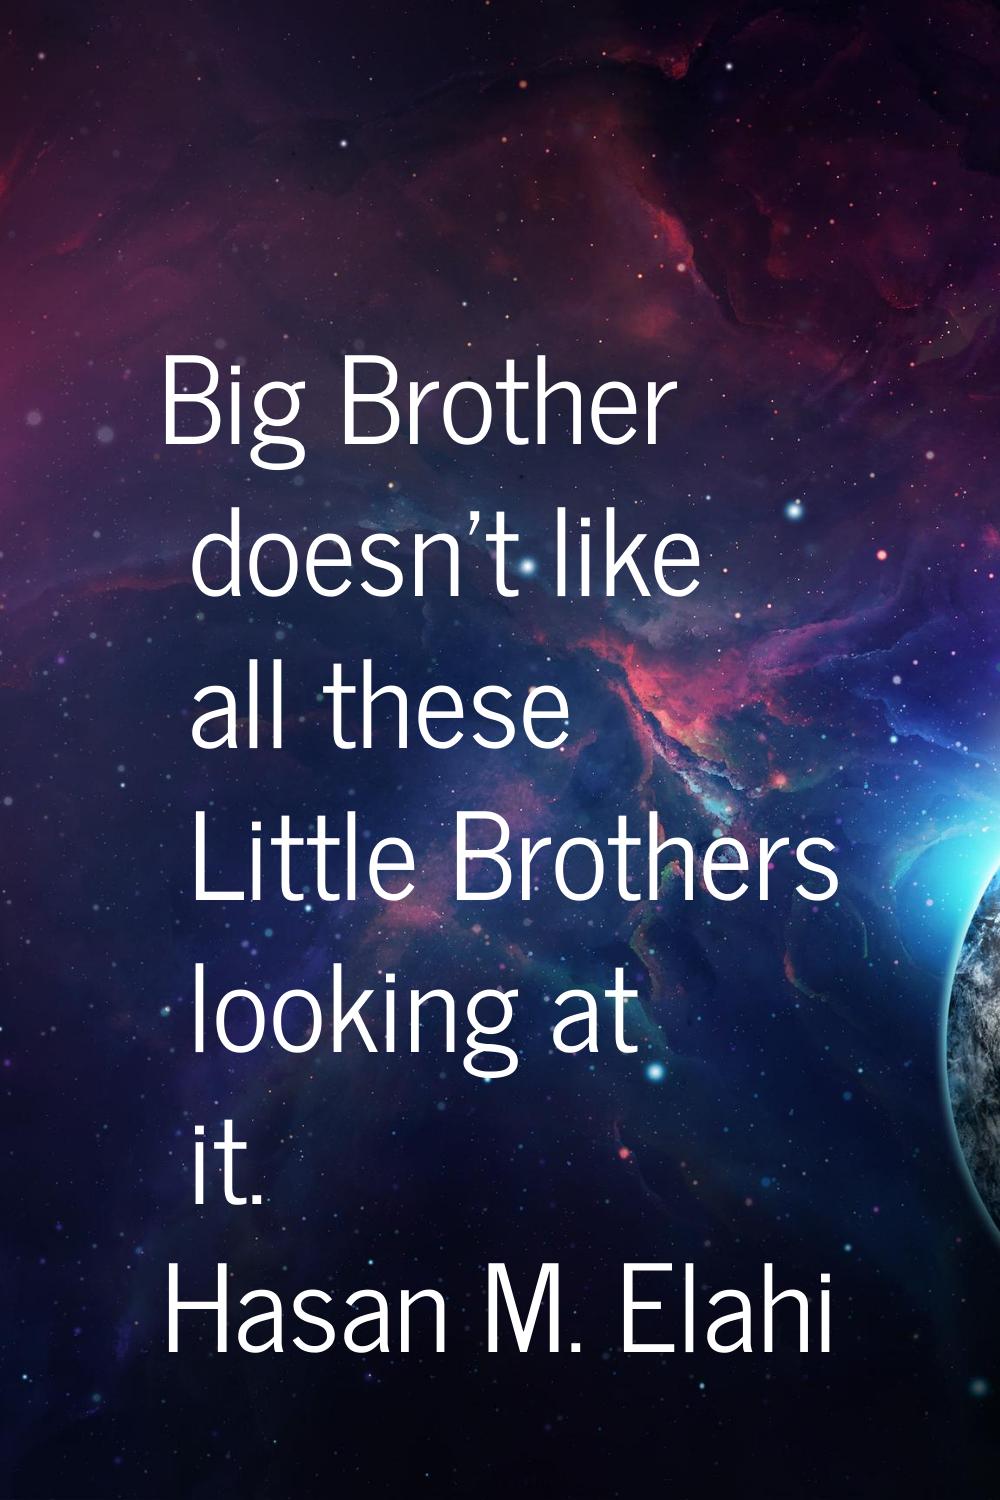 Big Brother doesn't like all these Little Brothers looking at it.